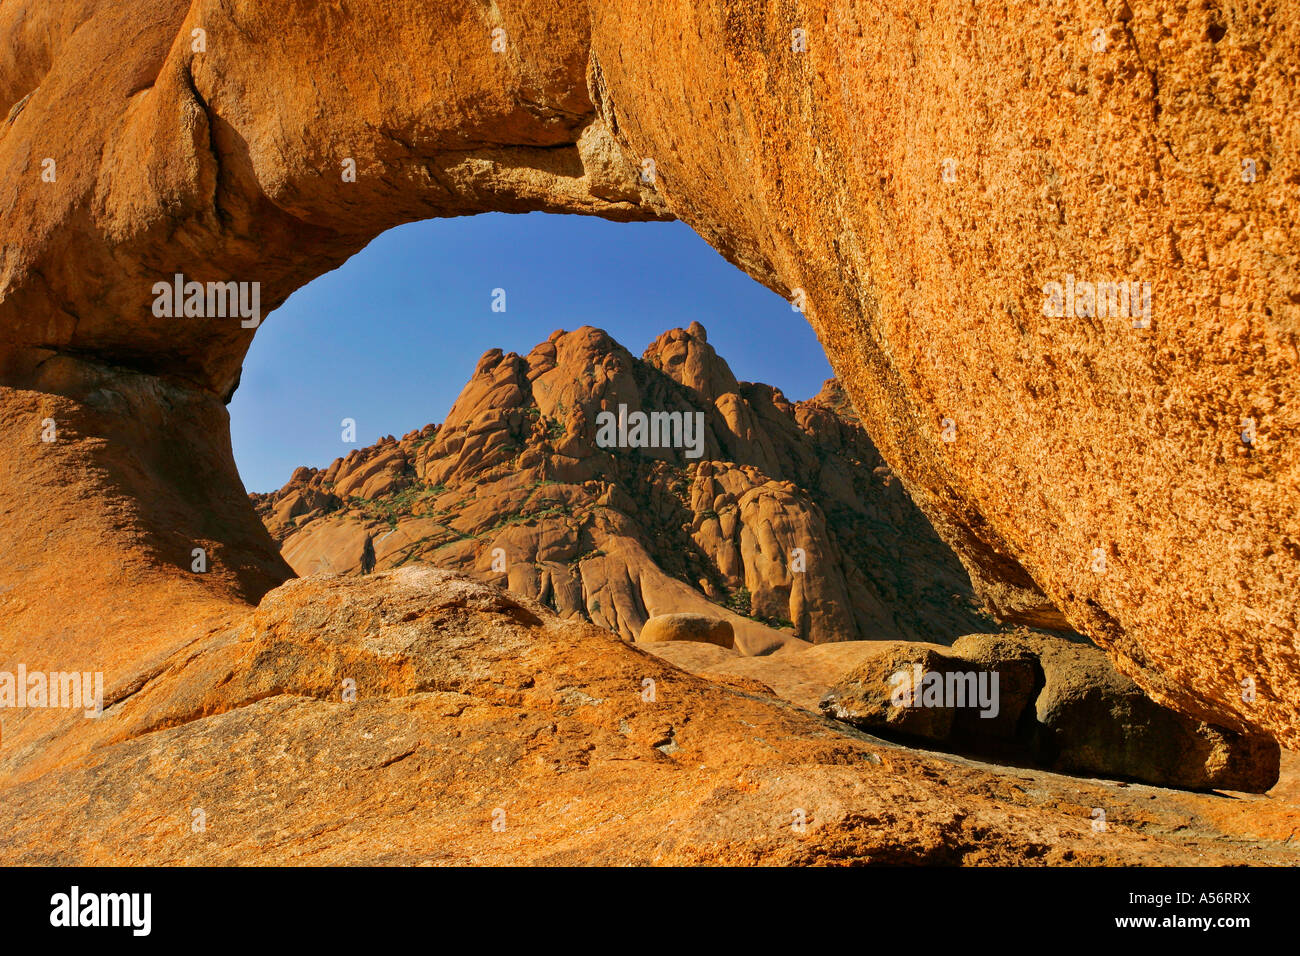 rock arch made of red granite Spitzkoppe area Namibia Africa Stock Photo